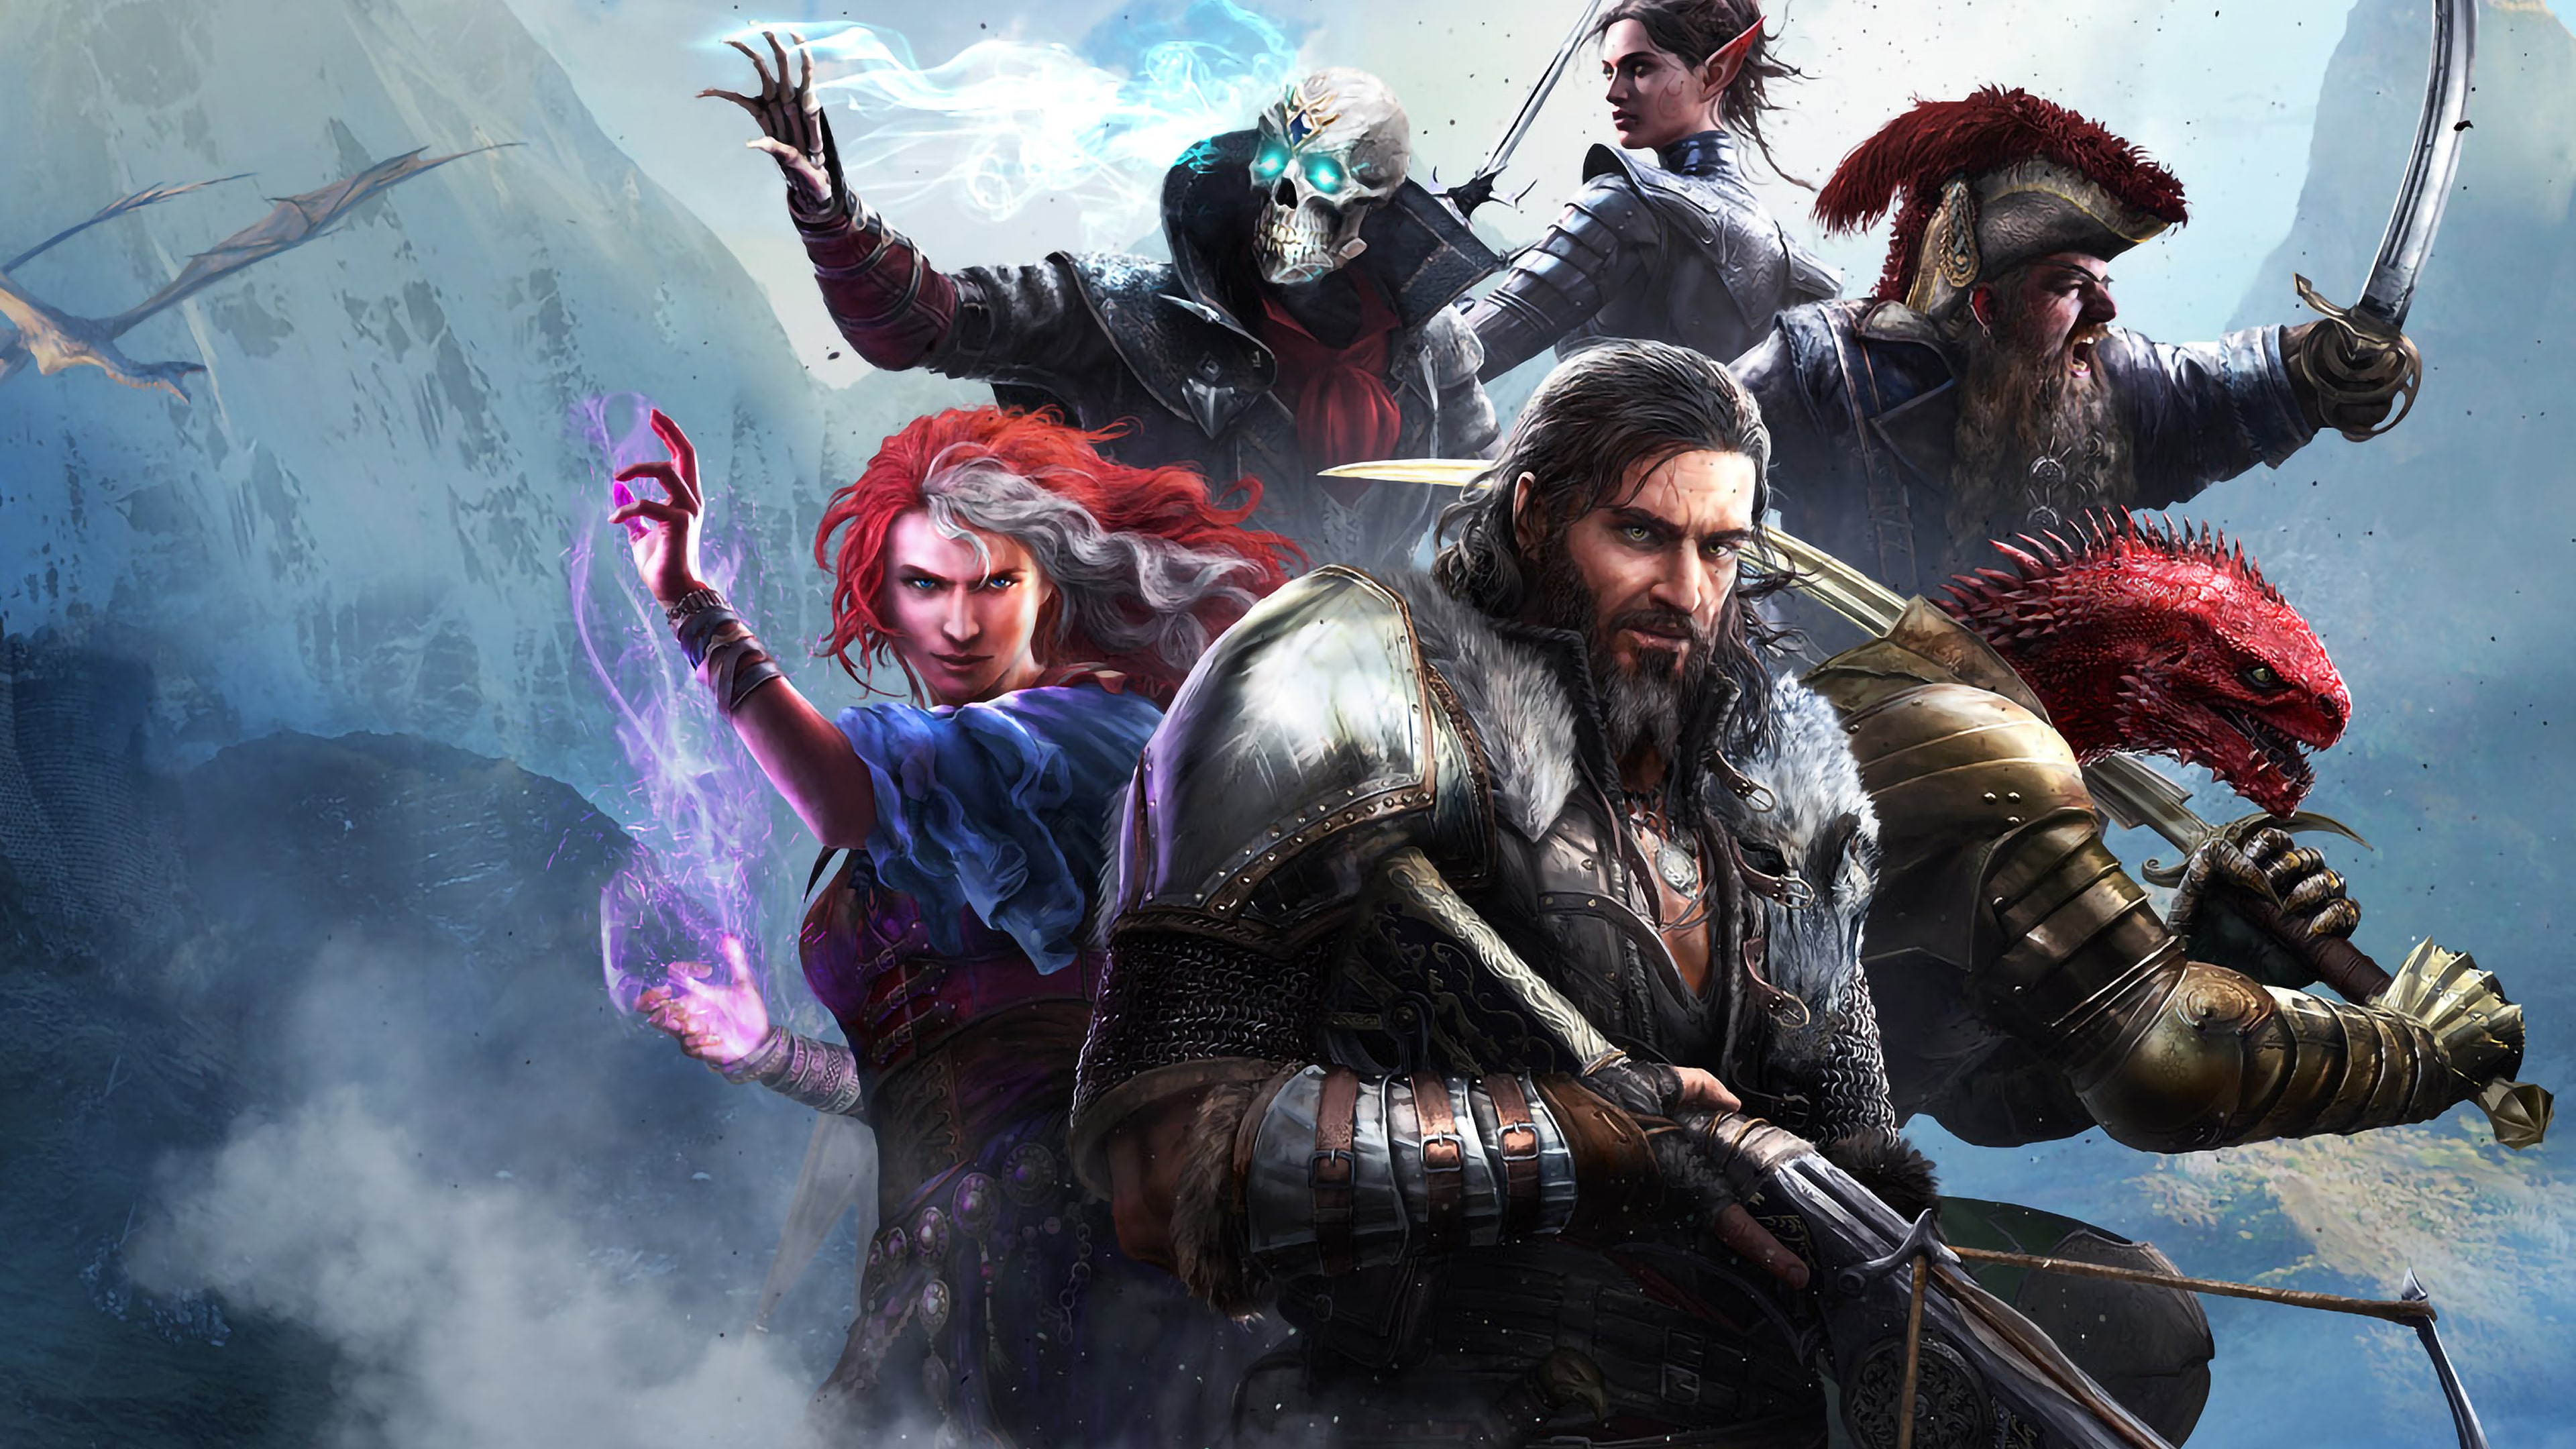 divinity 2 ps store